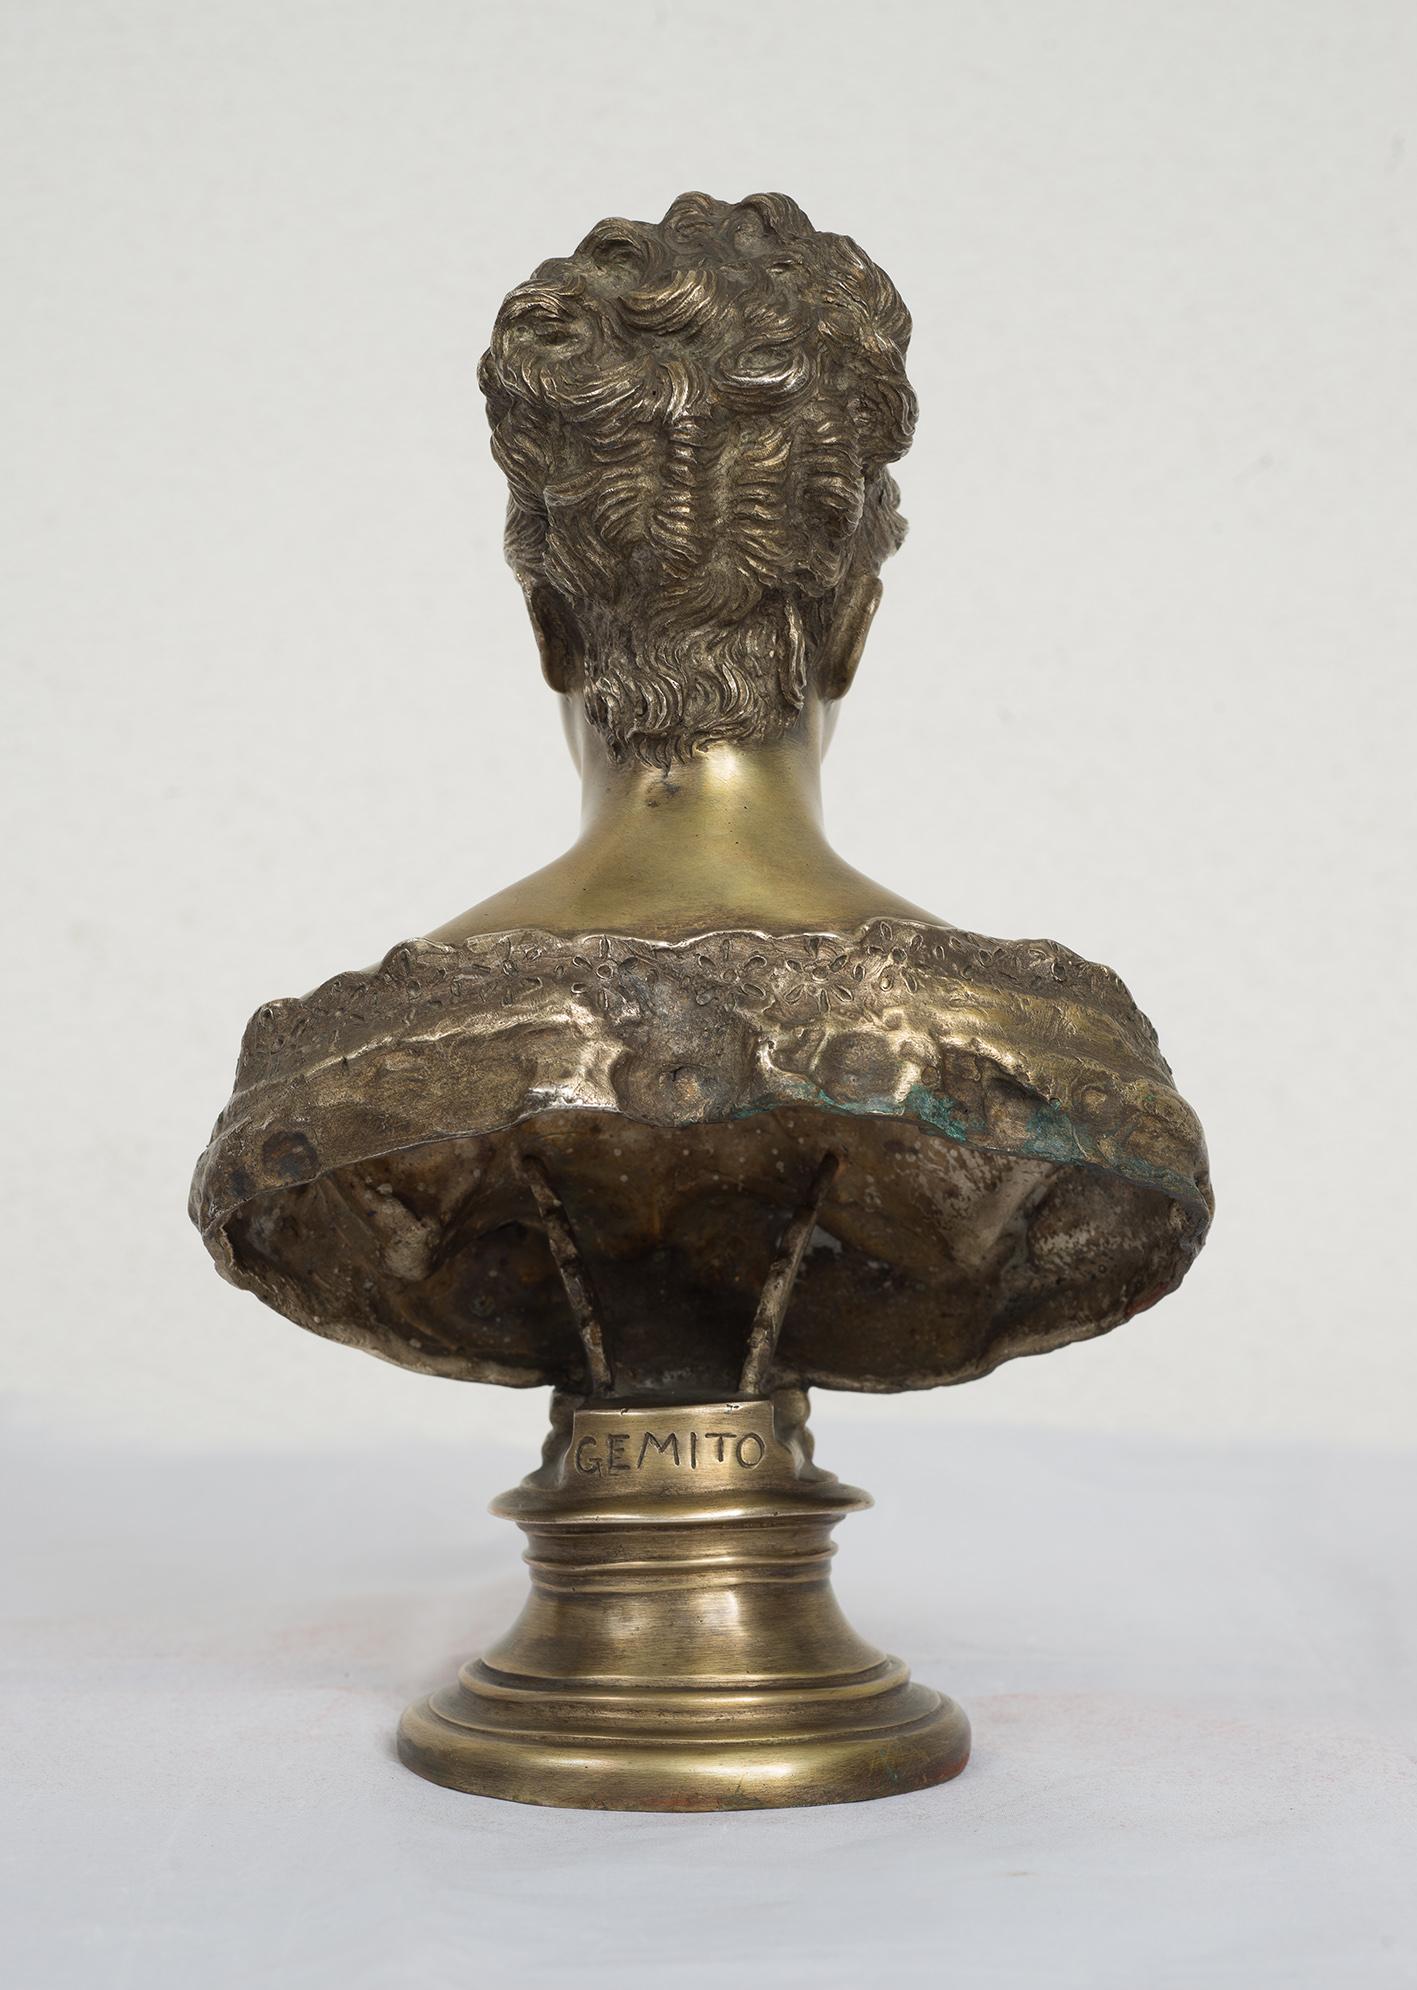 Pair of finely worked solid silver scutures signed Gemito with Chiurazzi's gallery stamp.

The woman is depicted half-length dressed in period clothing and rests on a circular base.

The man is represented shirtless and always rests on a circular